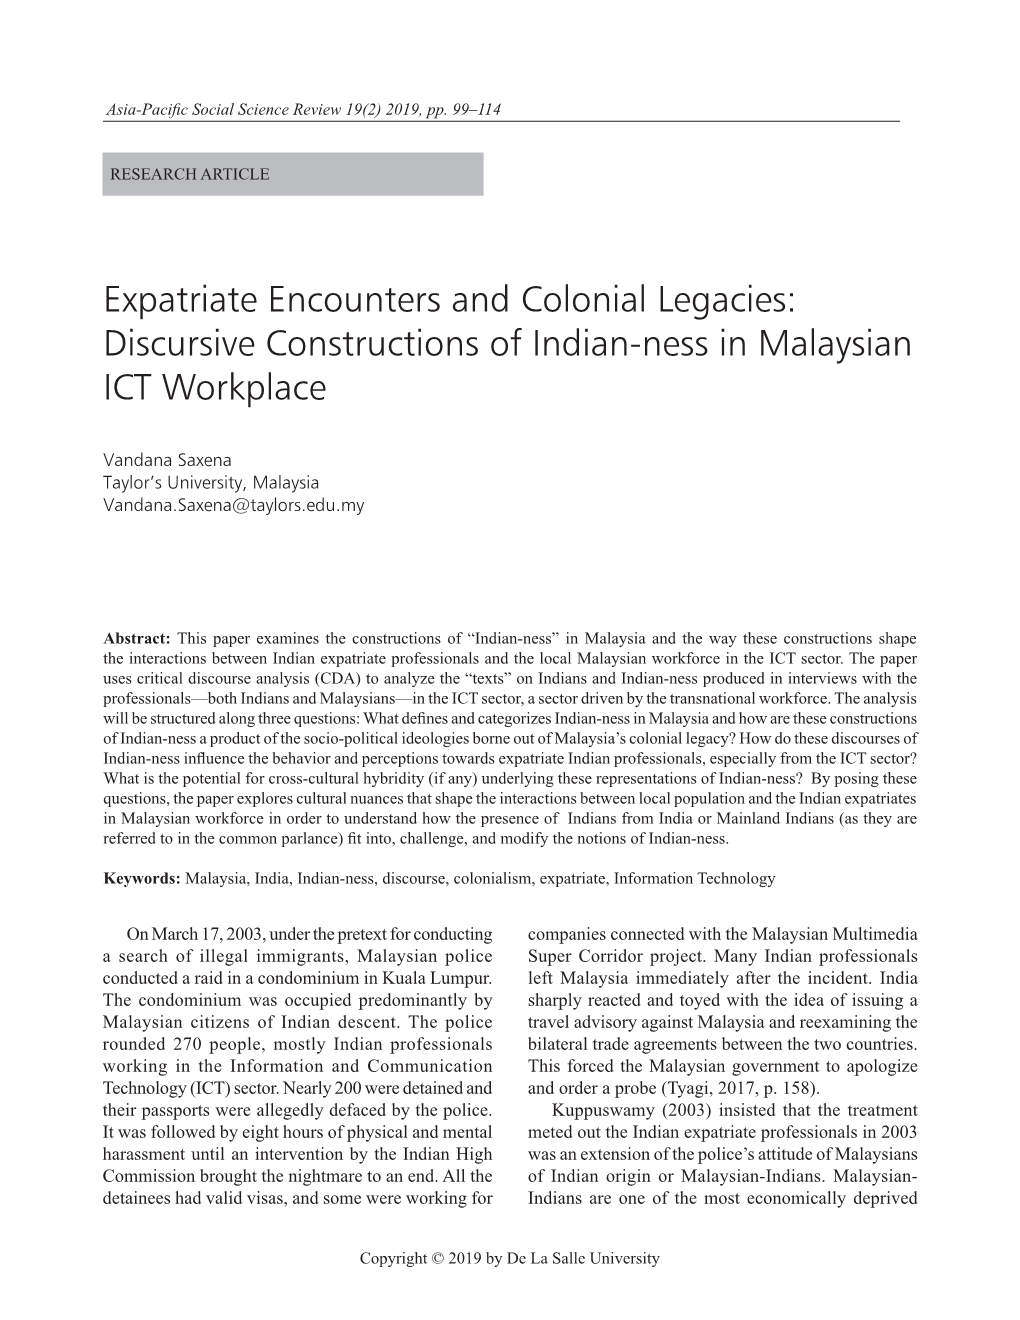 Expatriate Encounters and Colonial Legacies: Discursive Constructions of Indian-Ness in Malaysian ICT Workplace